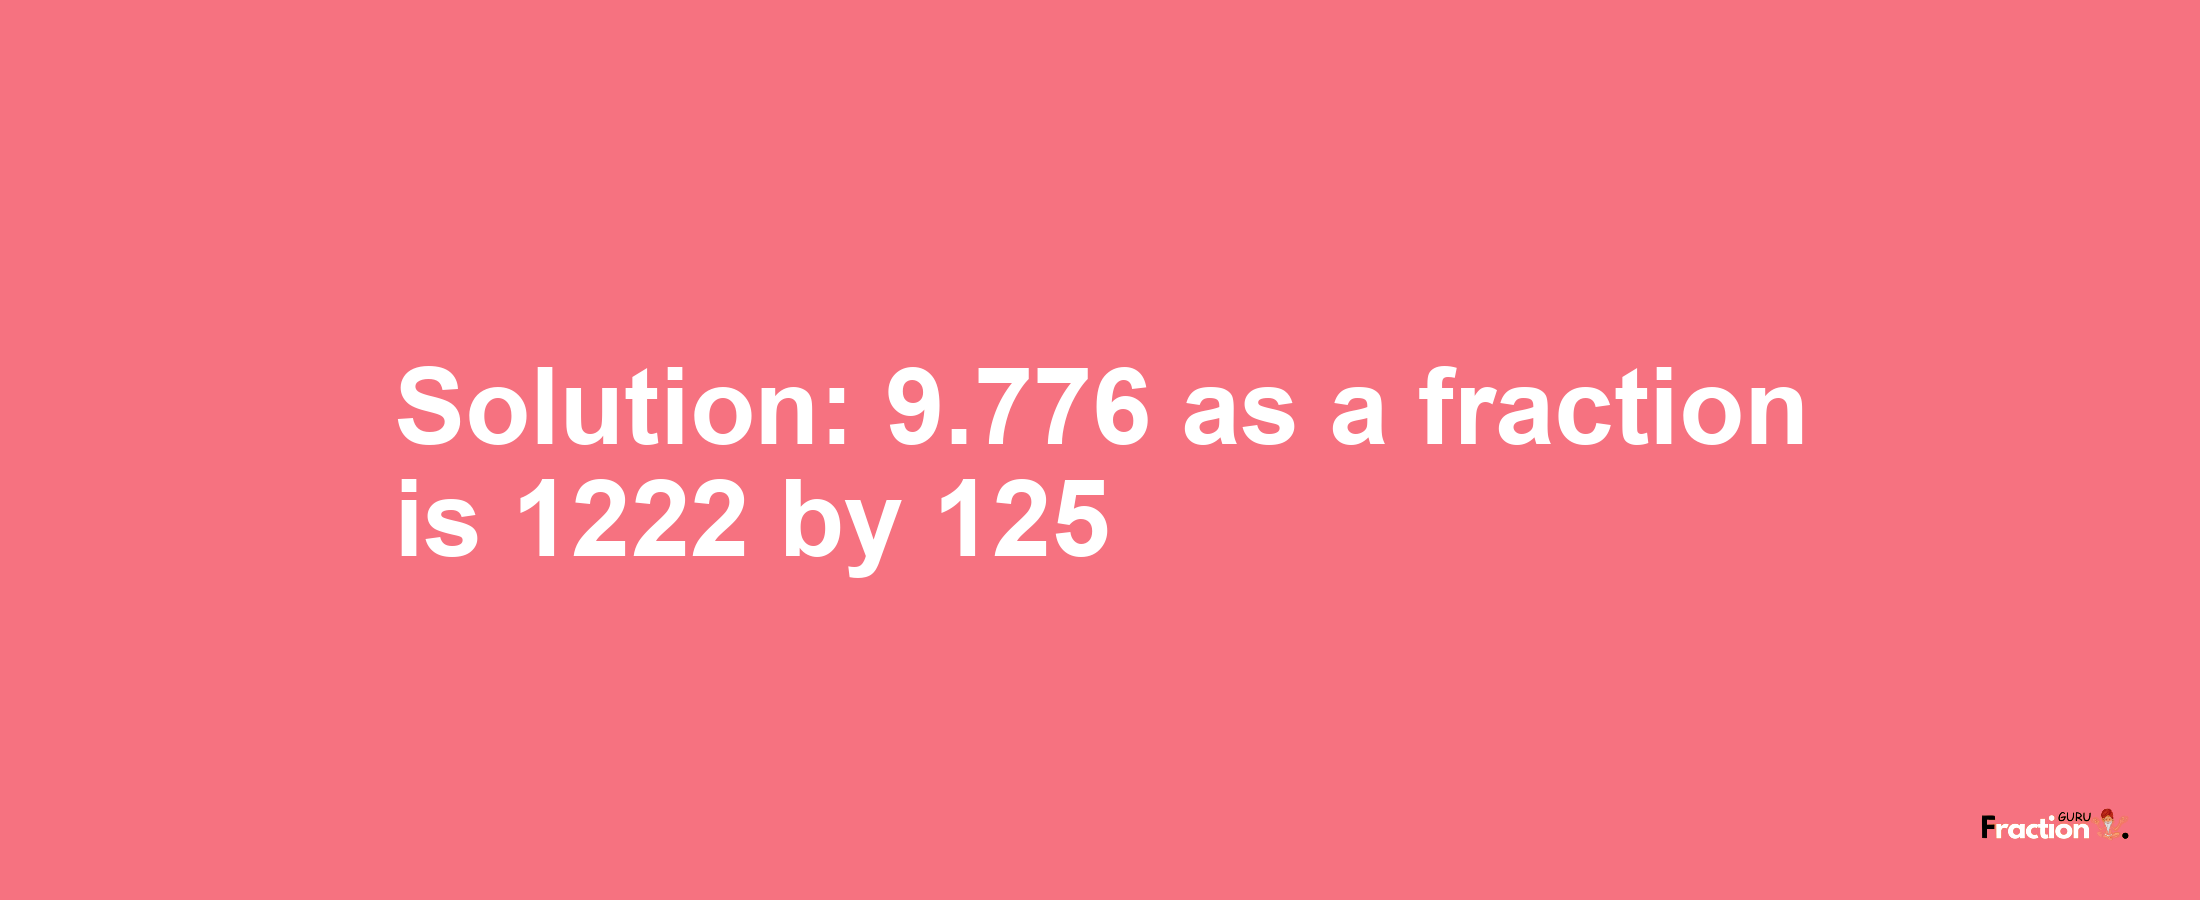 Solution:9.776 as a fraction is 1222/125